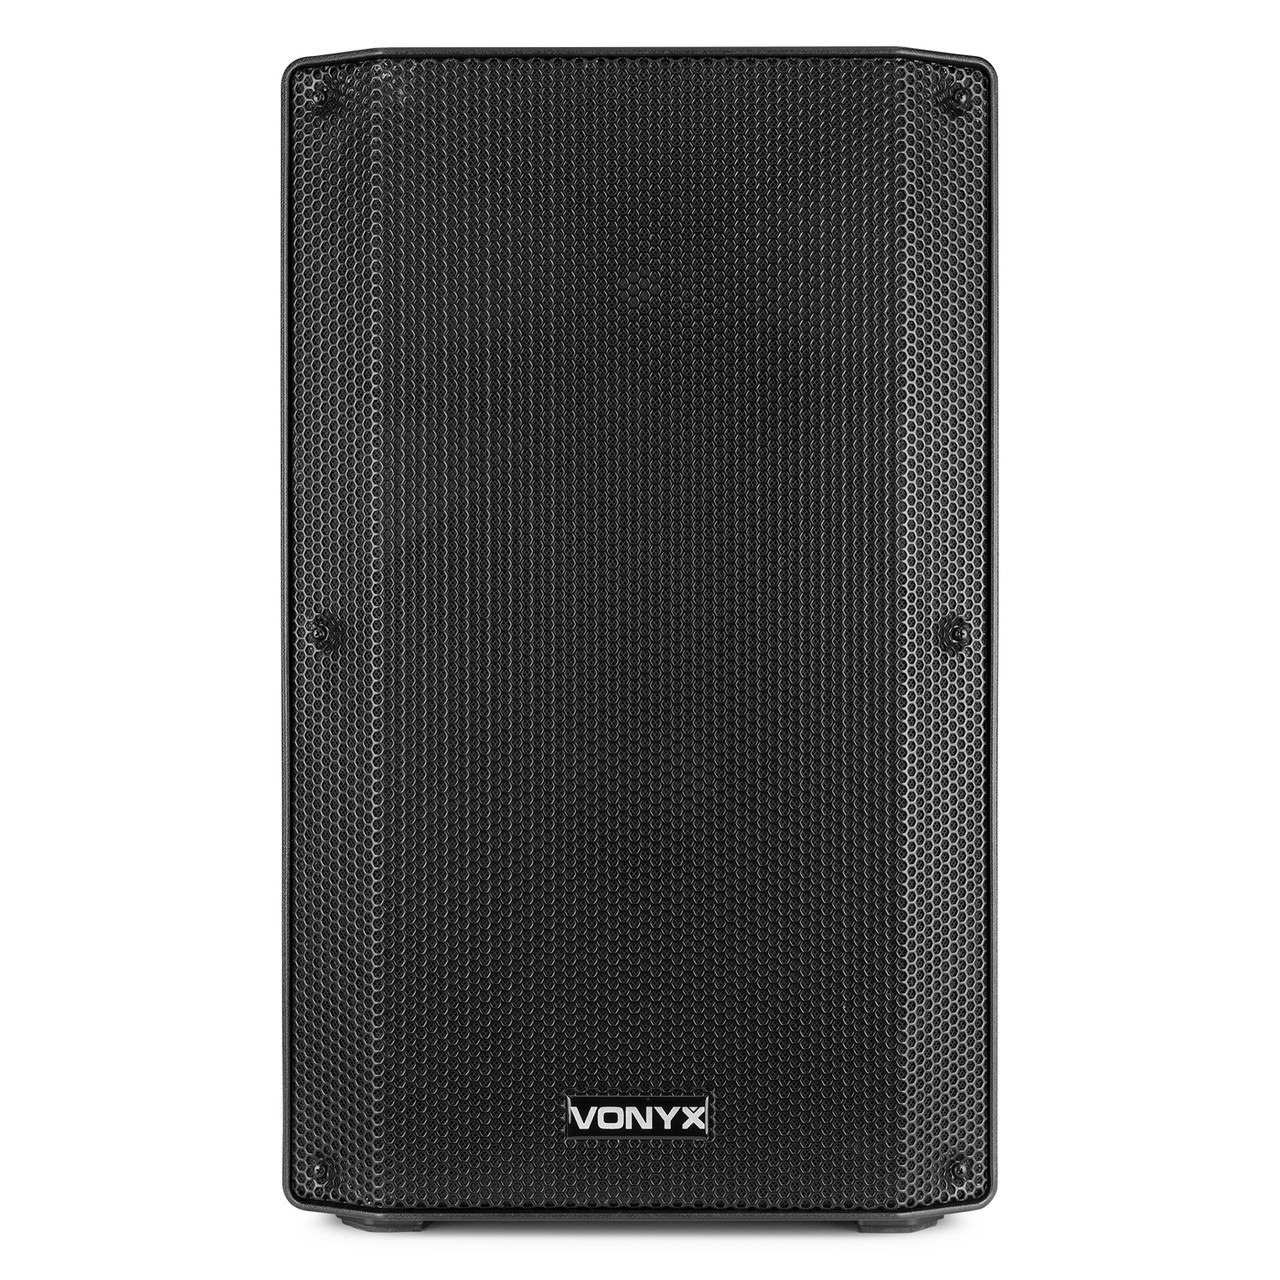 Vonyx VSA700 15" 1000W Battery Powered Portable PA System with Wireless Mics